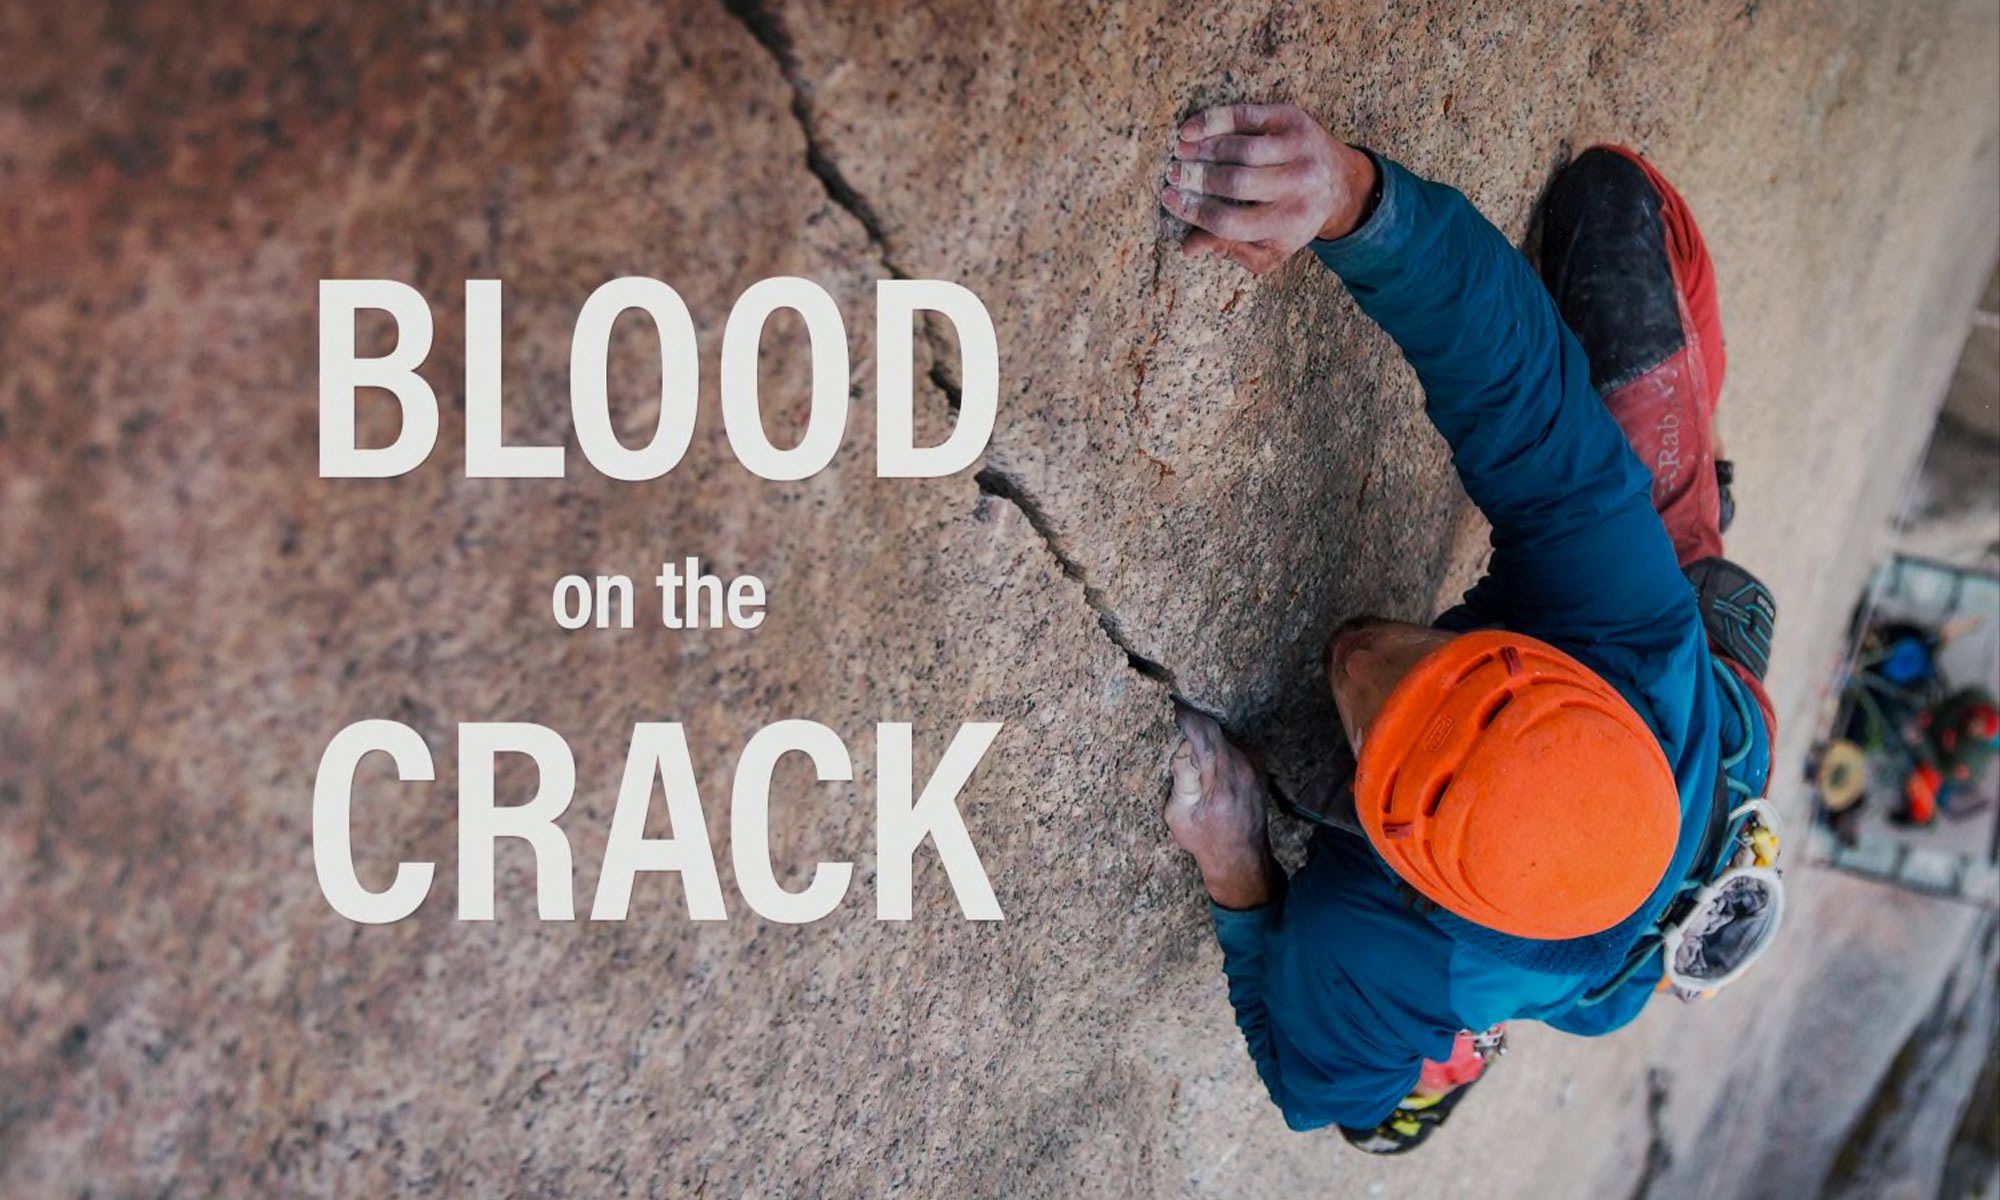 Blood on the crack